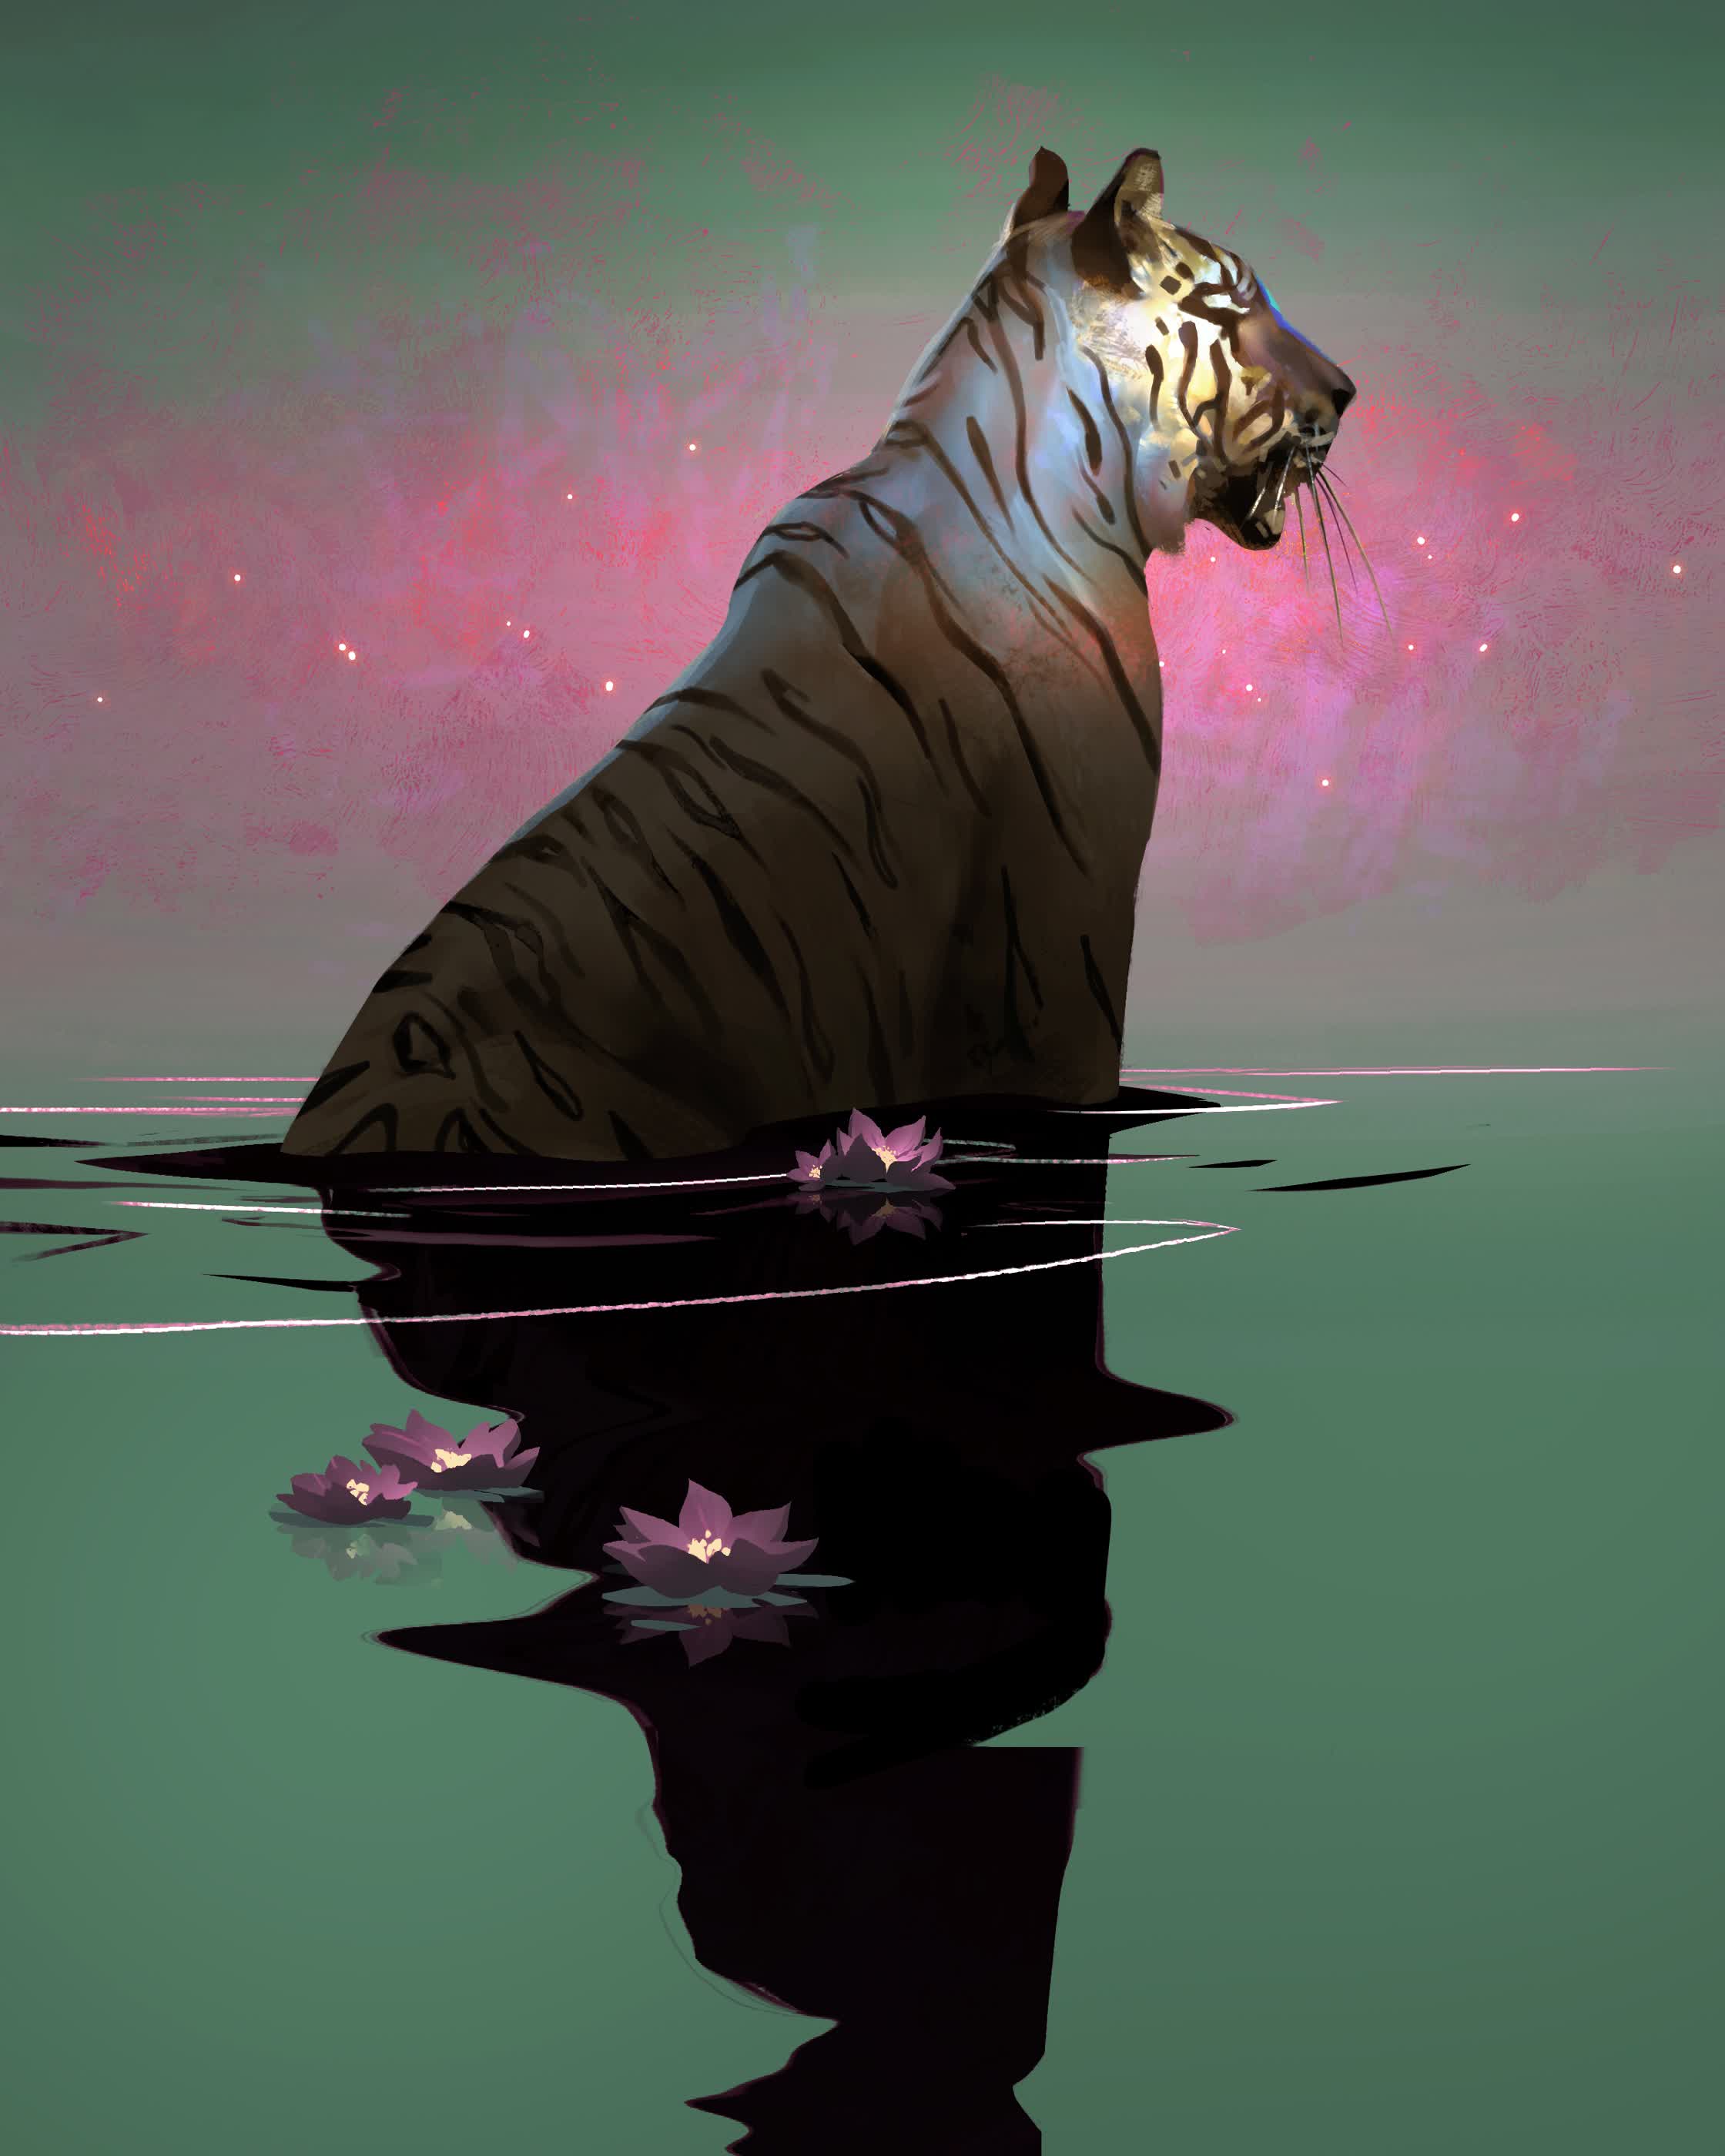 Timid reflection - Personal Work.jpg